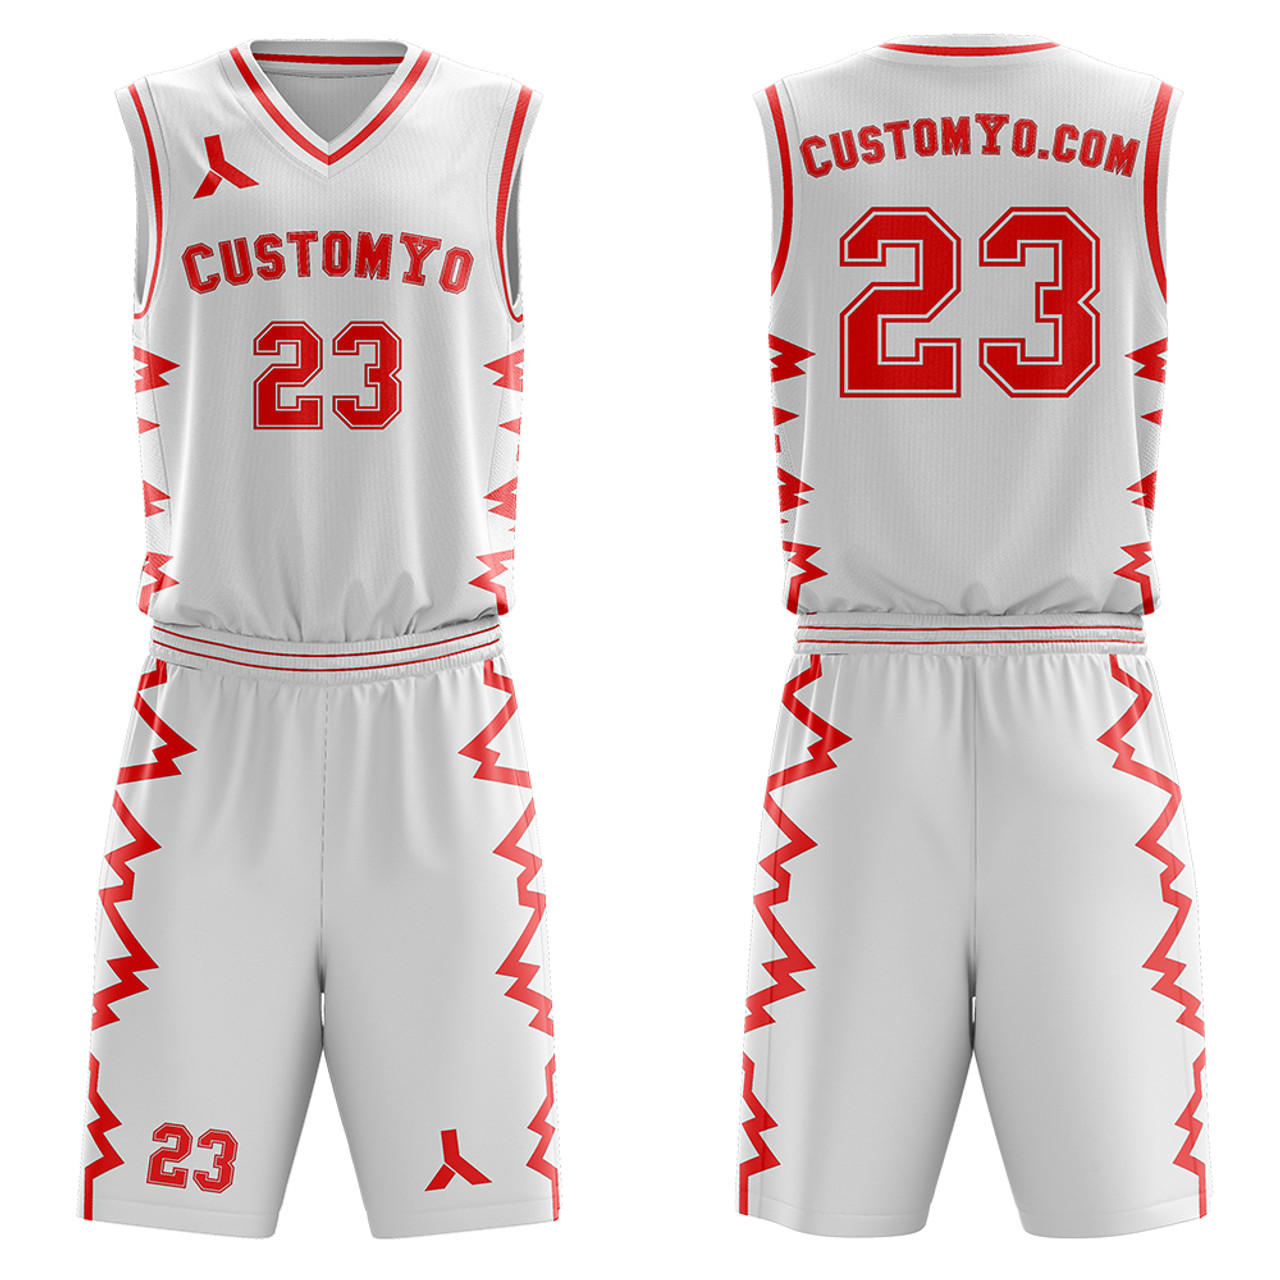 Men's And Youth V-neck Uniforms Custom Basketball Jersey Set - Make Team  Uniforms Print Team Name, Number And Your Name. White 130cm